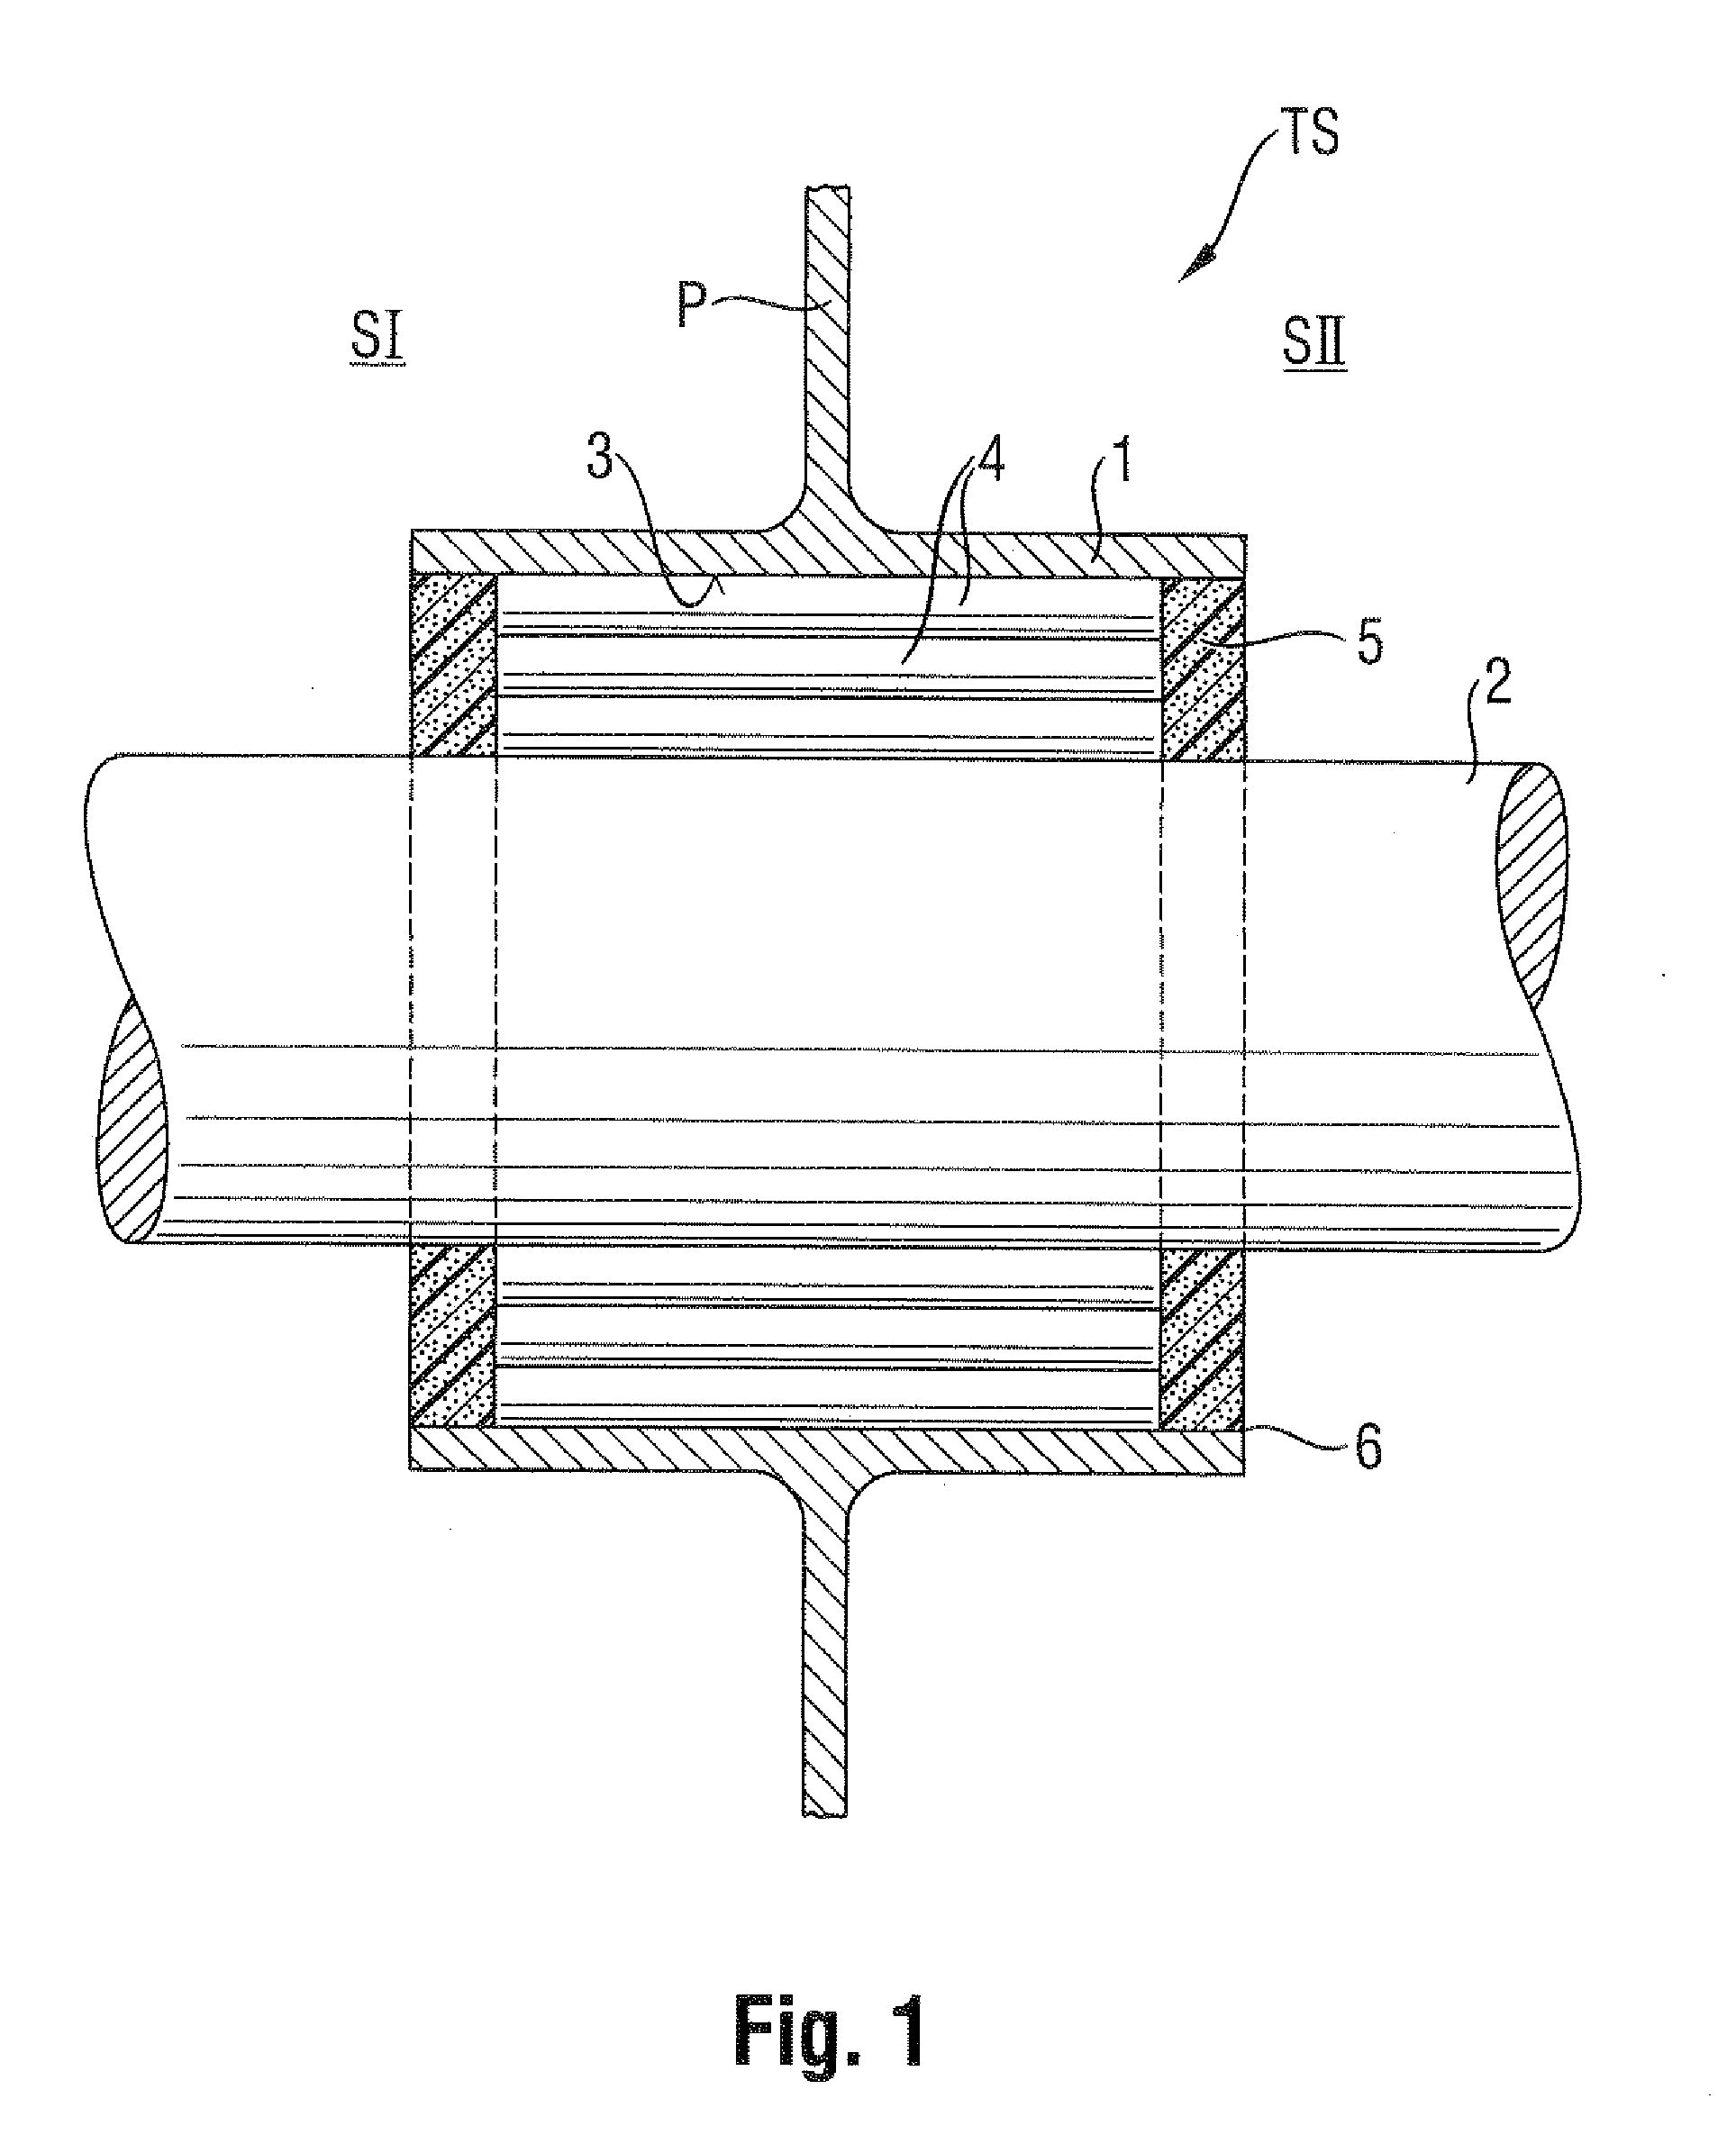 System and method for sealing in a conduit a space between an inner wall of the conduit and at least one pipe or cable extending through the conduit